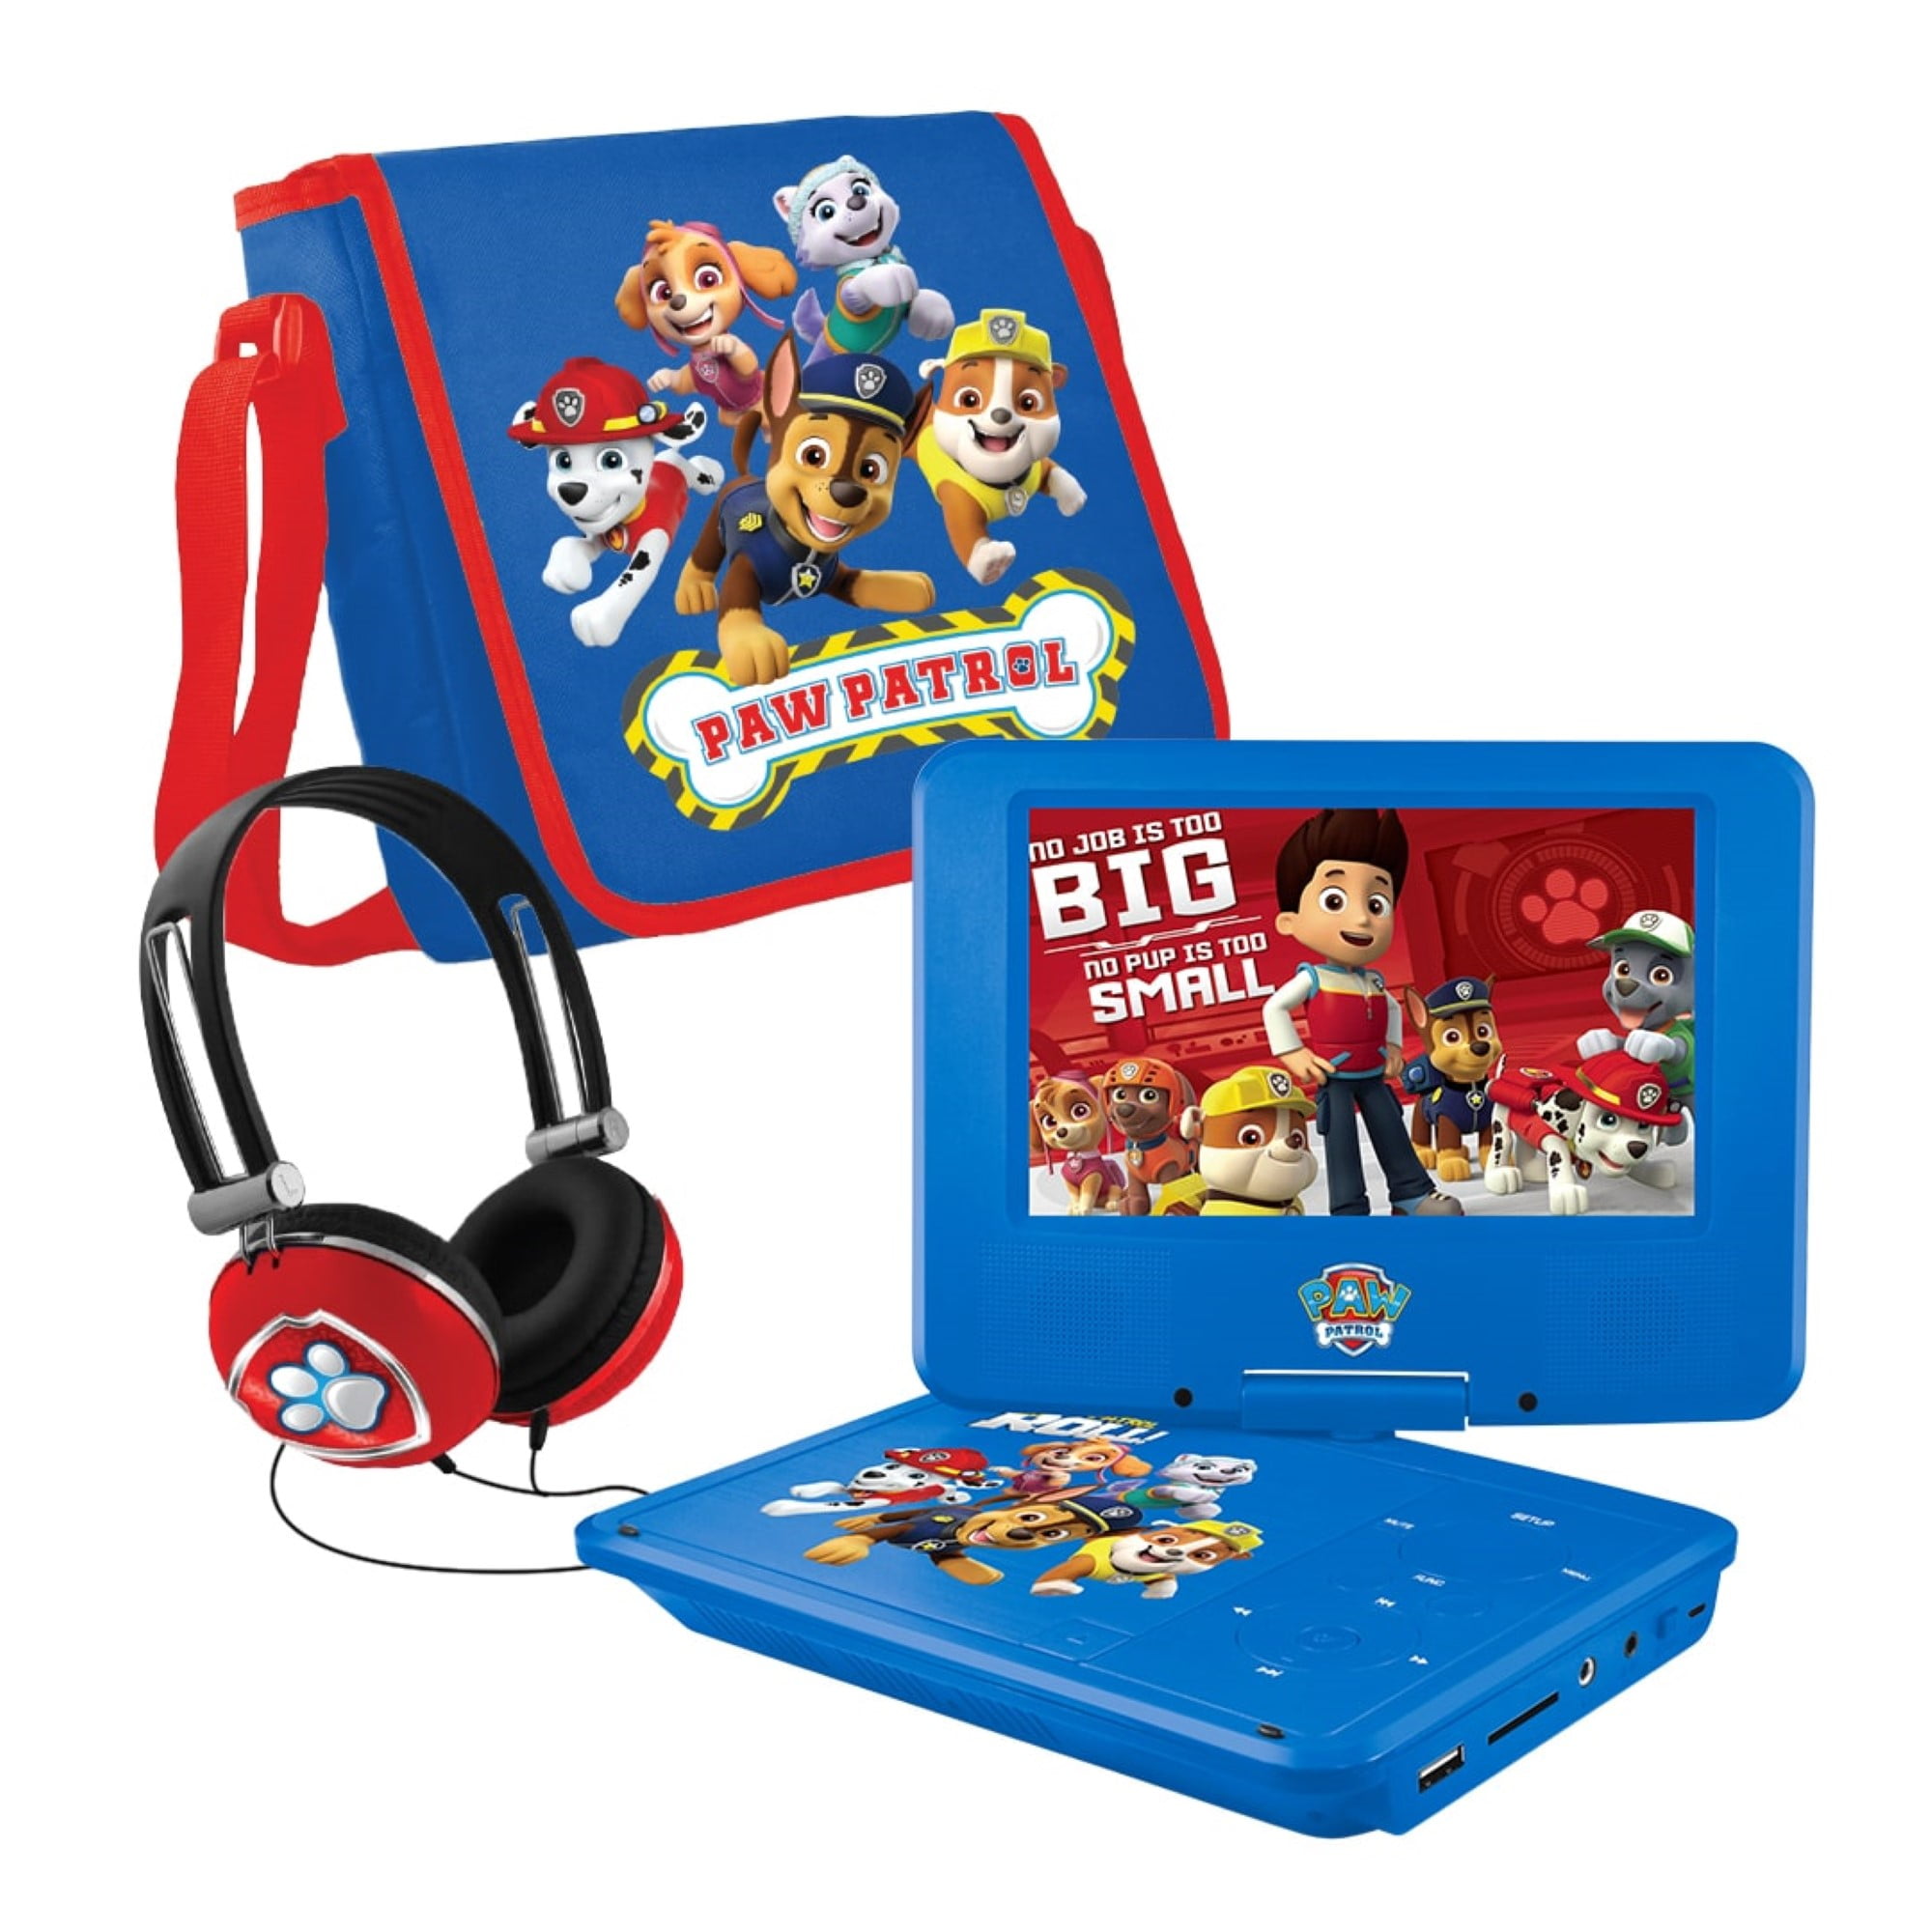 PAW Patrol NKPDVD700CH 7" Portable DVD Player with Matching Headphones + Carrying - Blue - Walmart.com